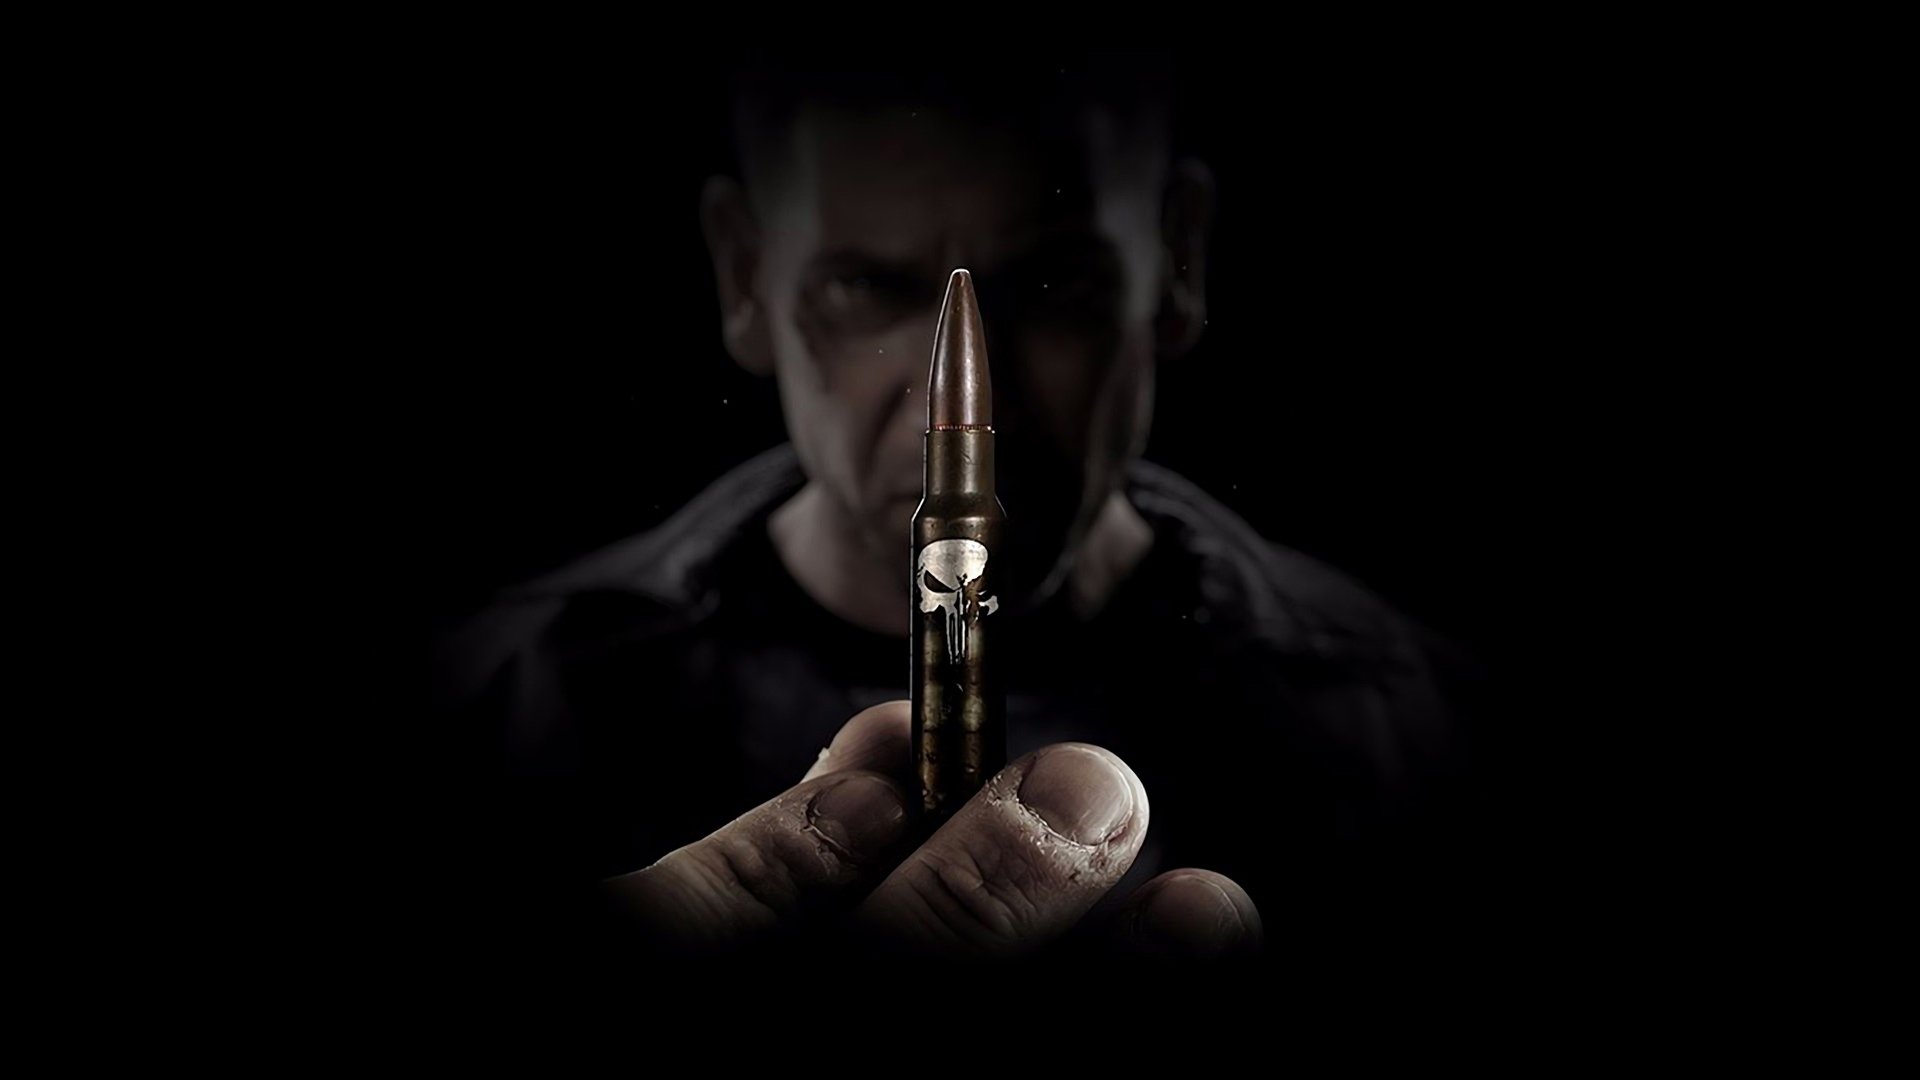 the punisher, tv show cellphone